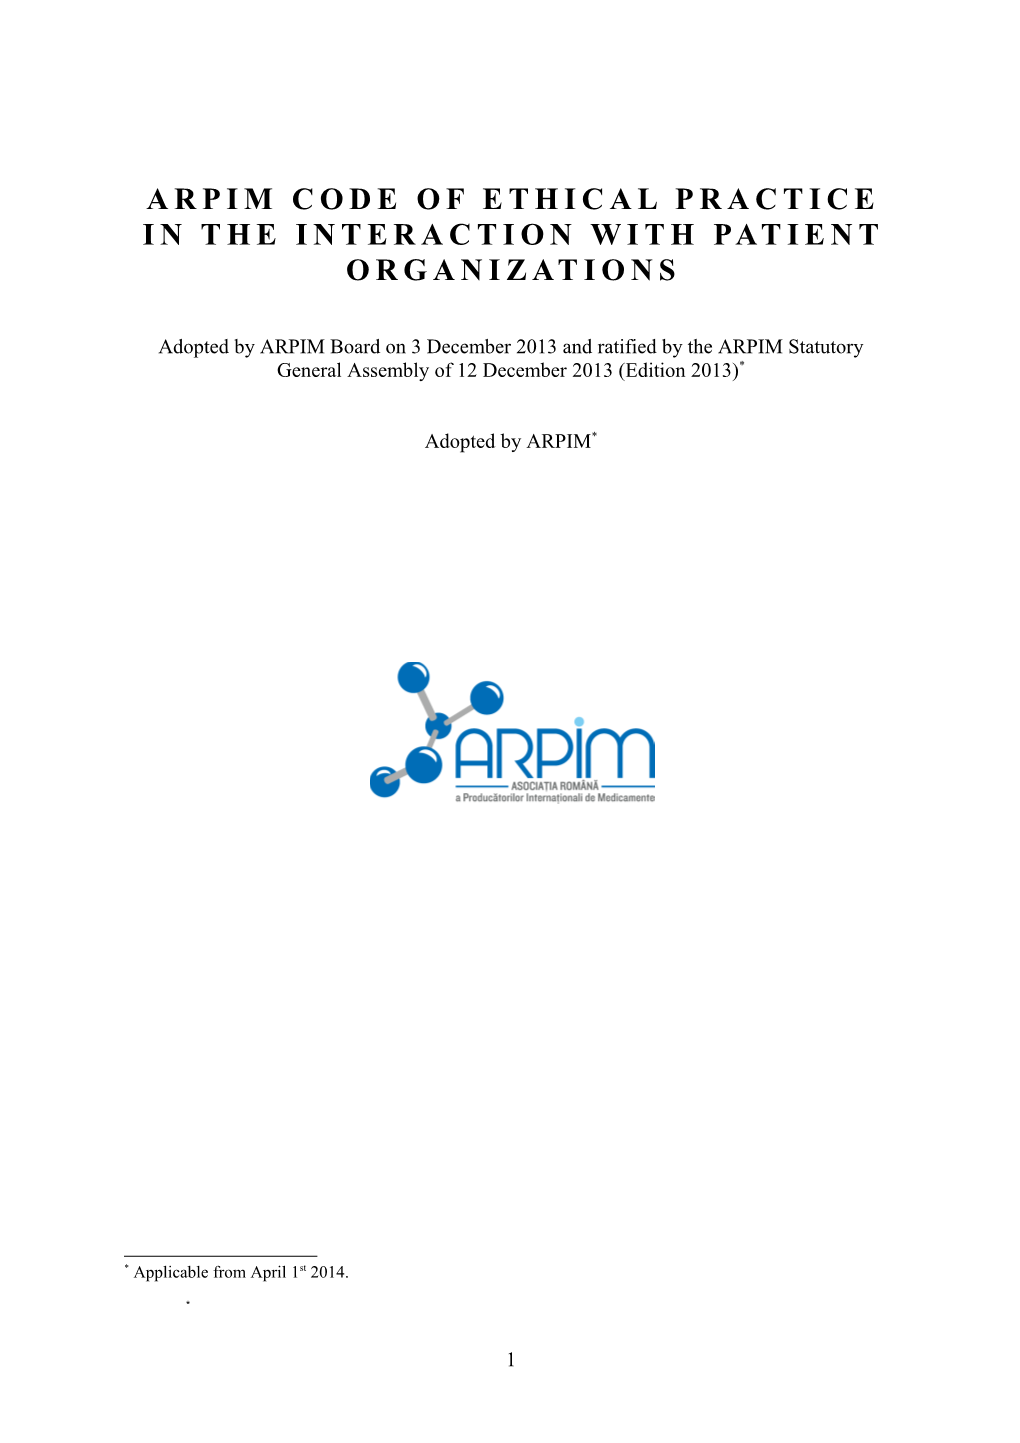 ARPIM Code of Ethical Practice in the Interaction with Patient Organizations